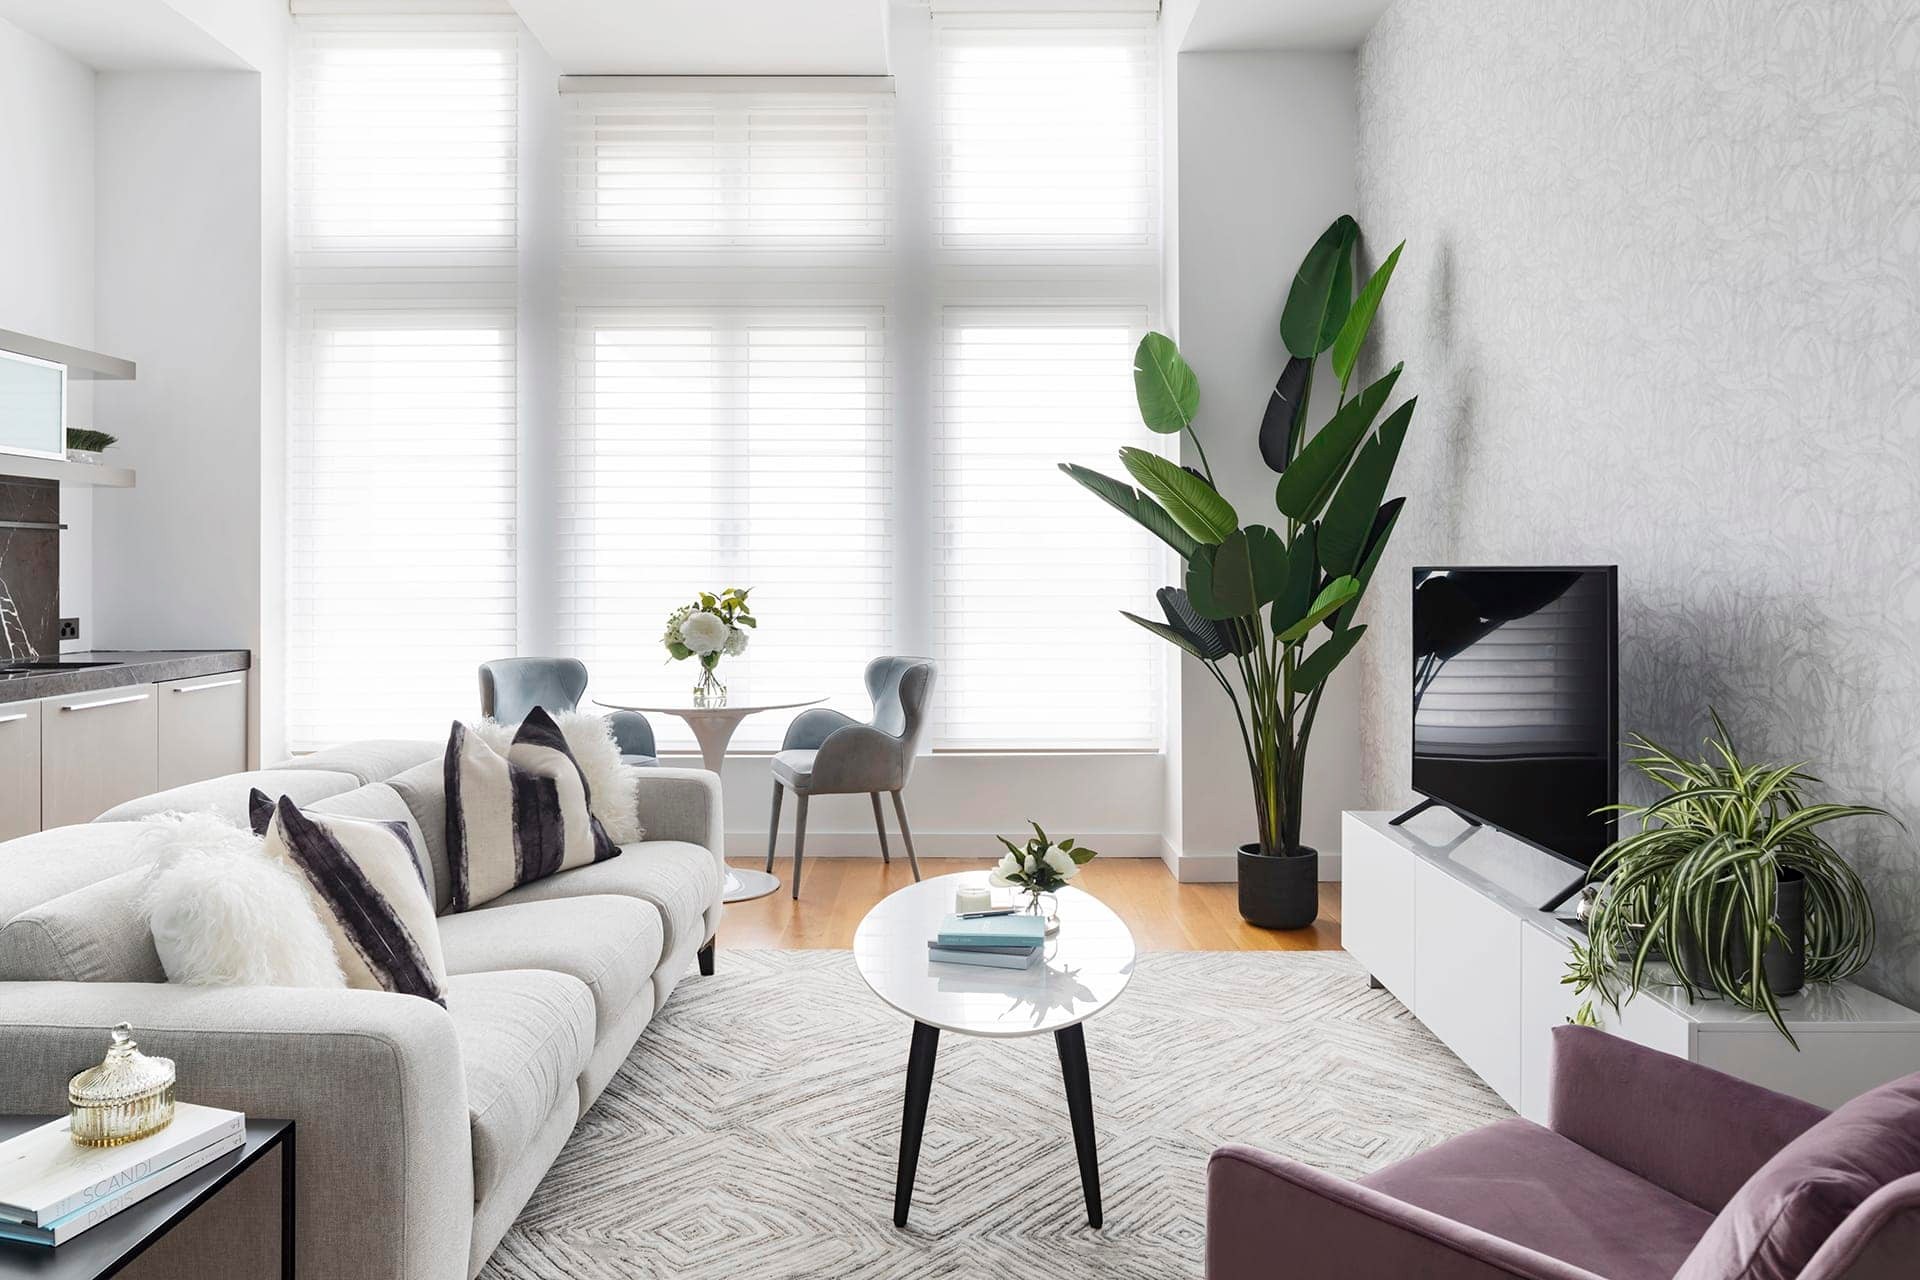 Melbourne apartment make over with grey recliner sofa from Plush and blinds from Luxaflex